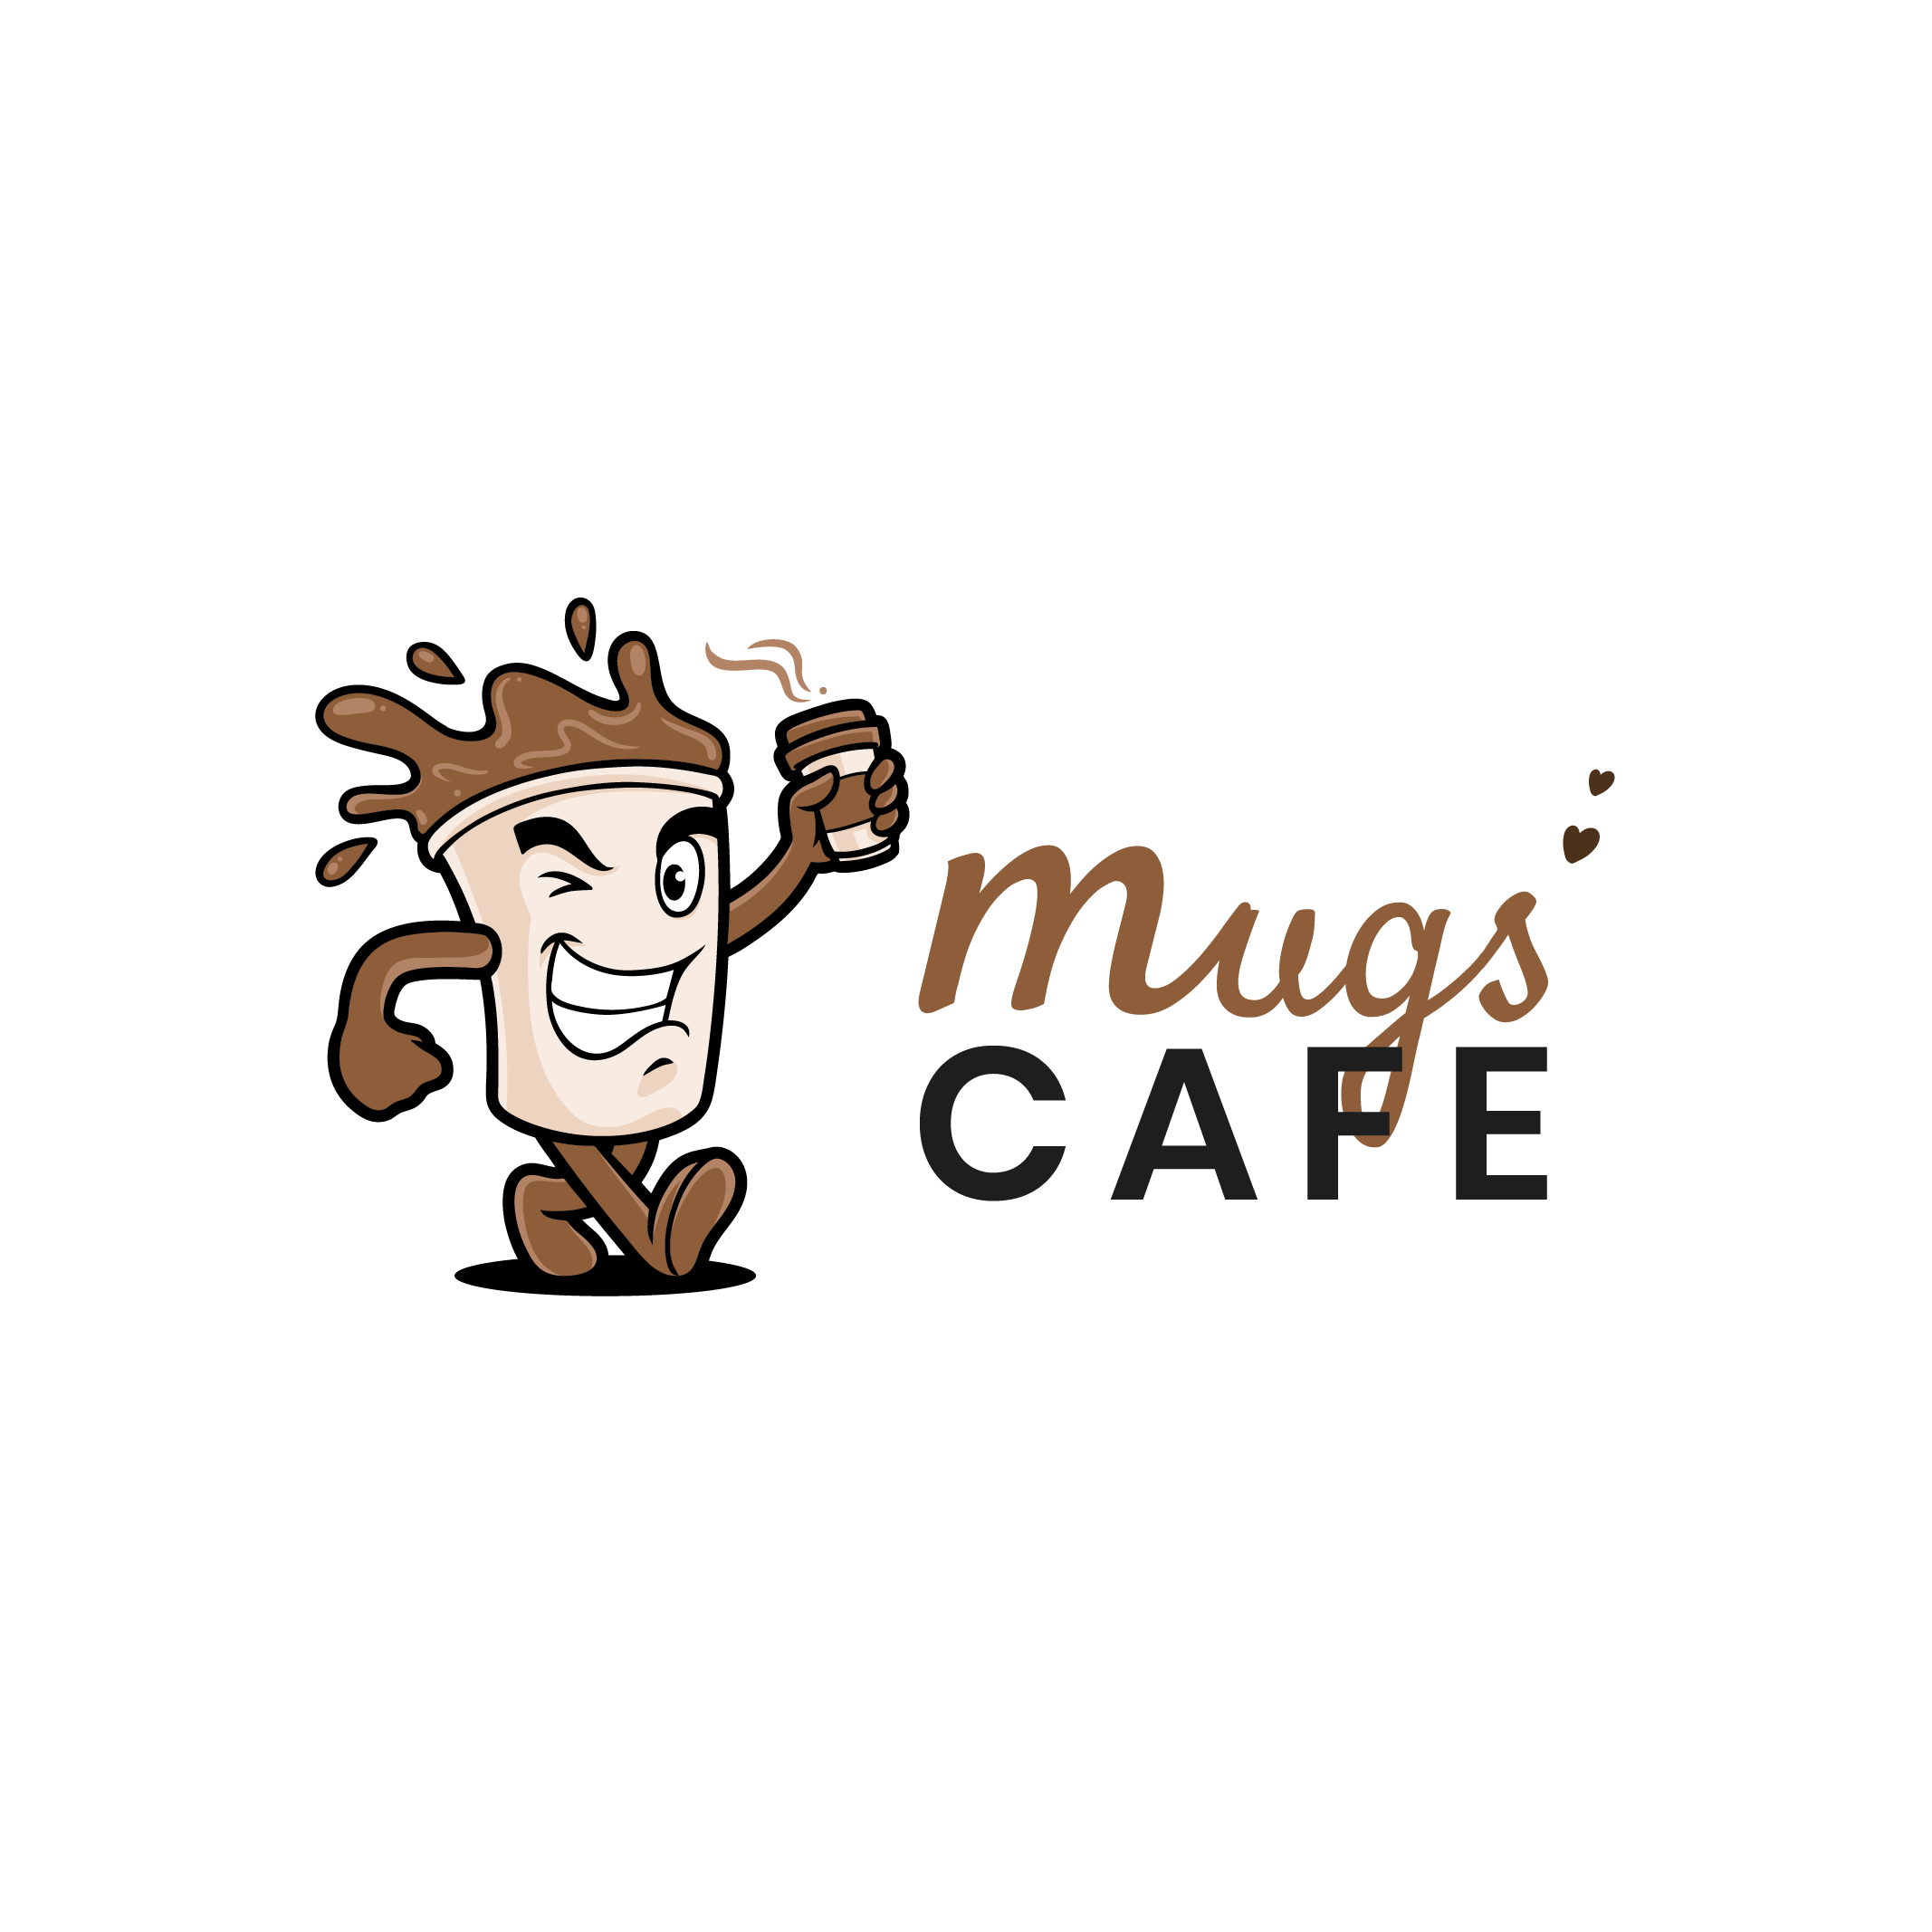 Brand Building Project for Mugs Cafe